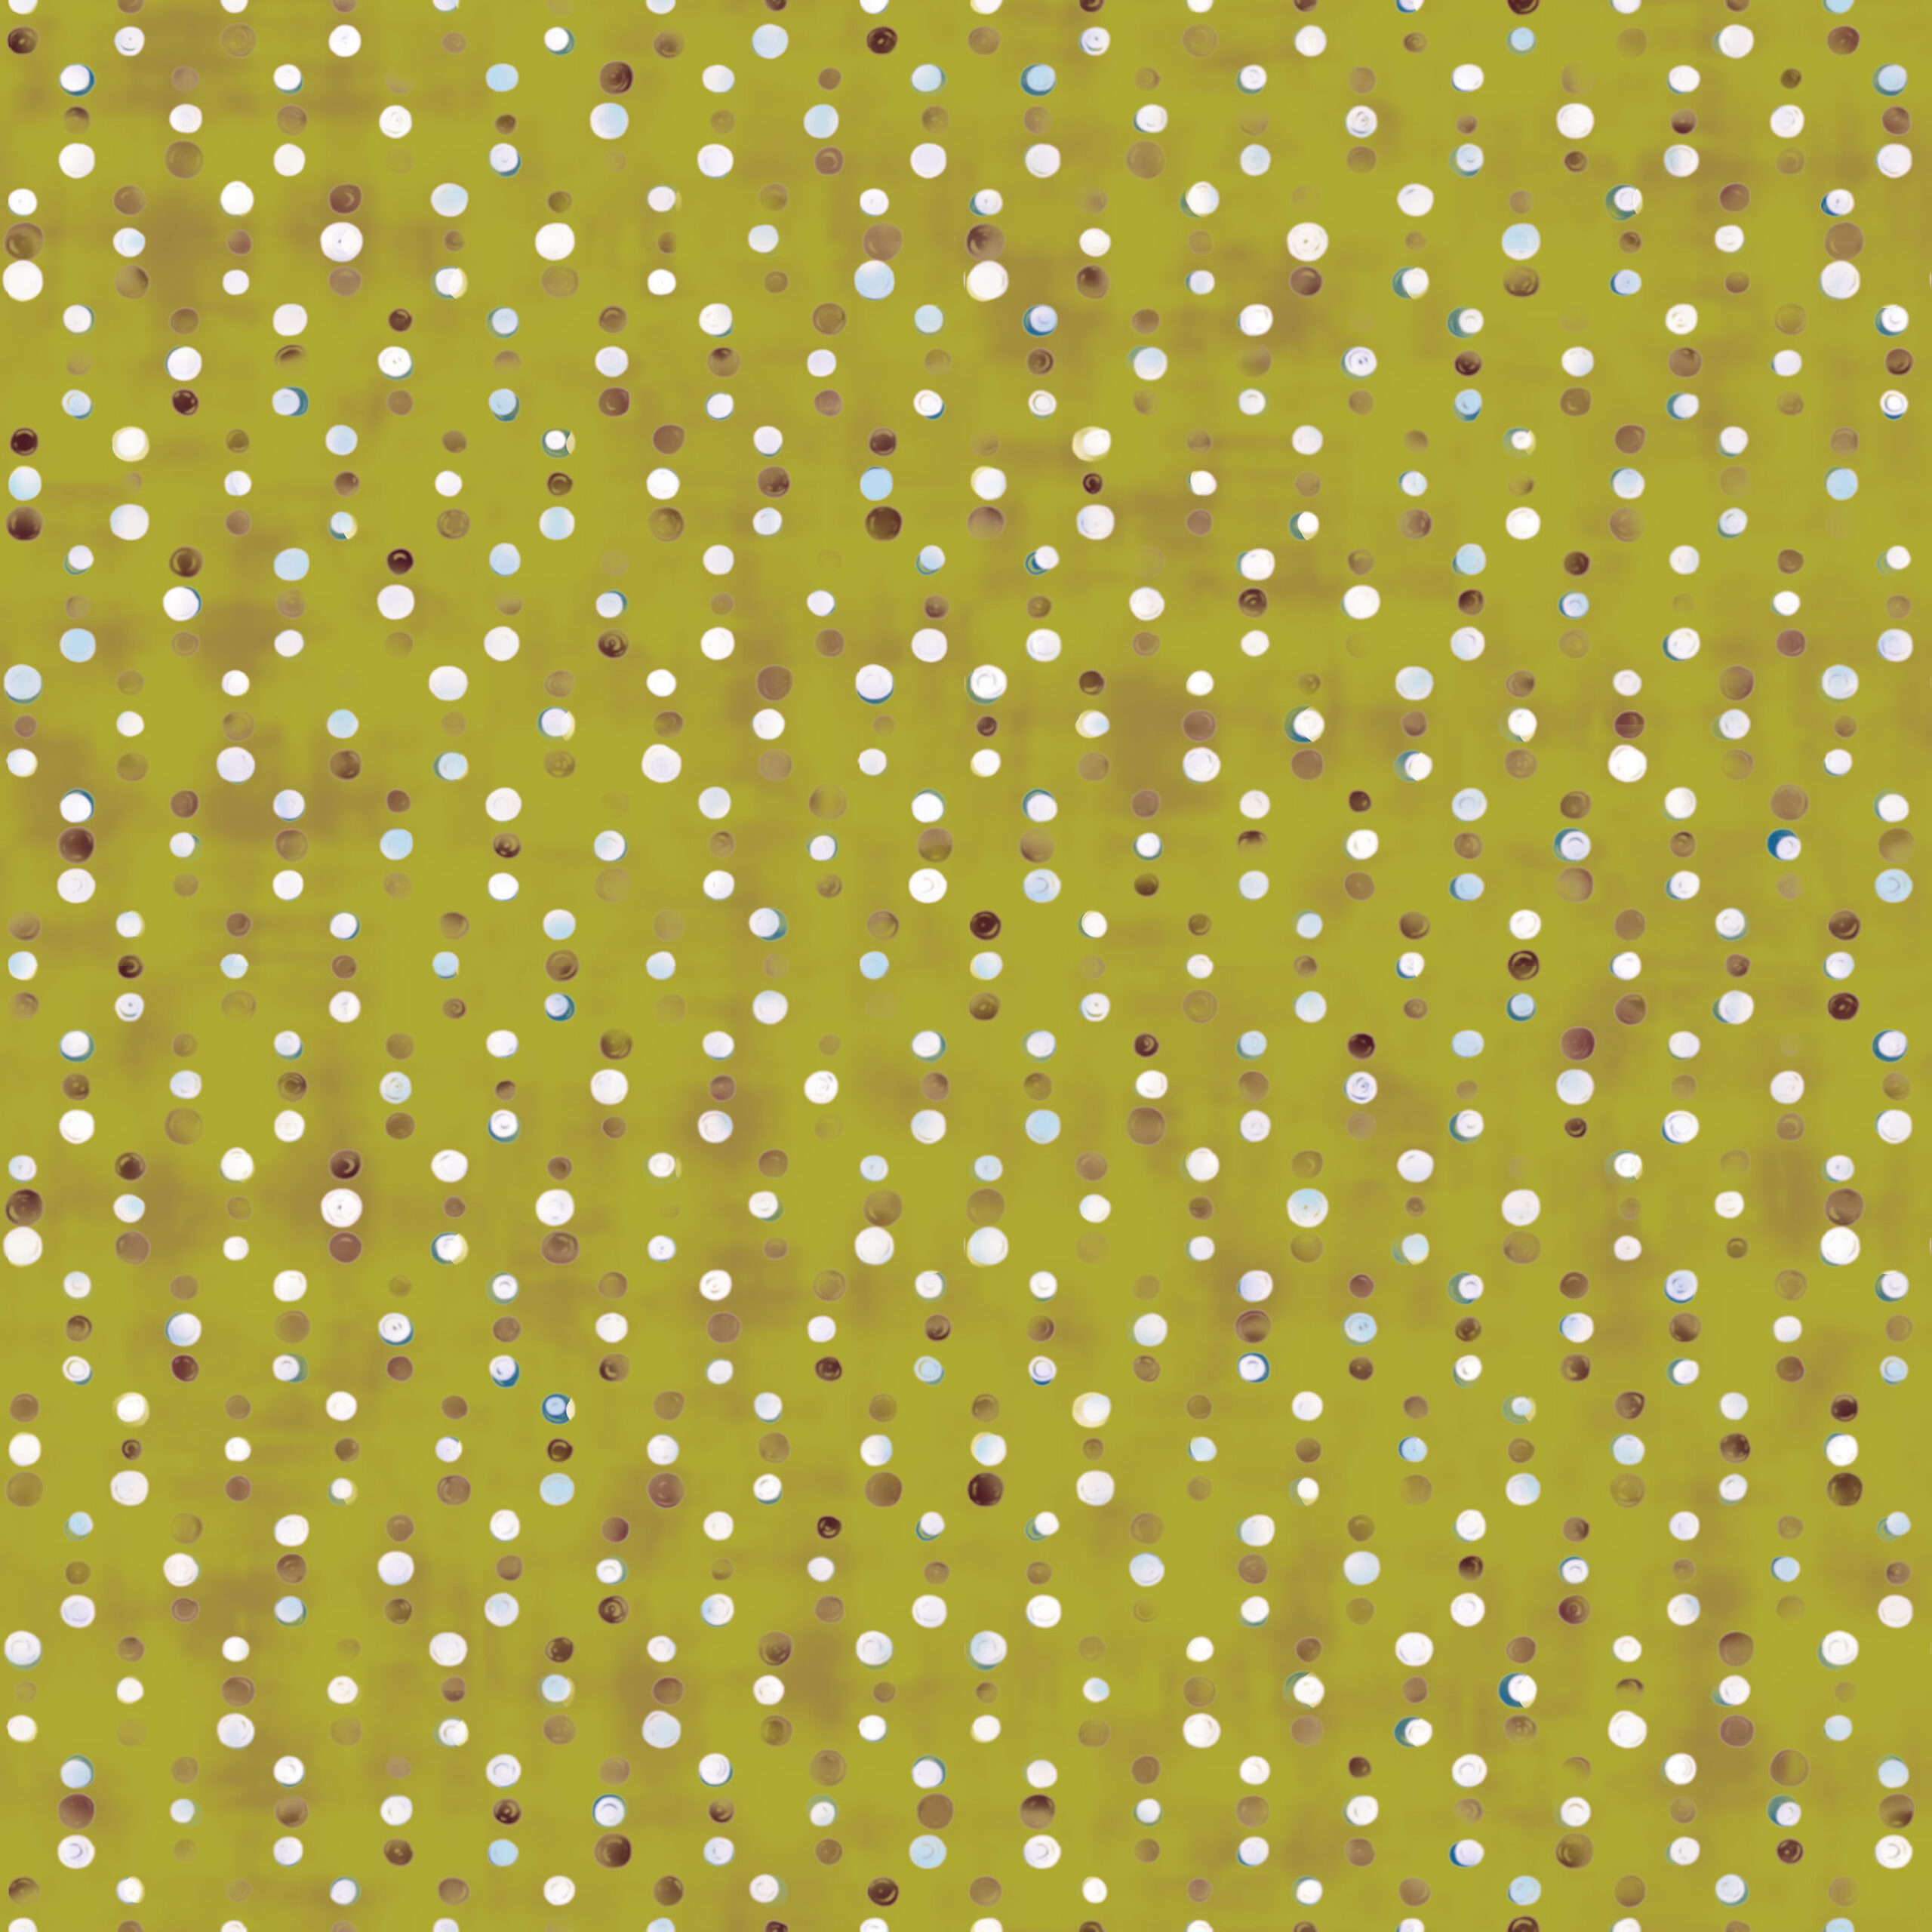 Textured dot pattern for upholstery and wallcovering.